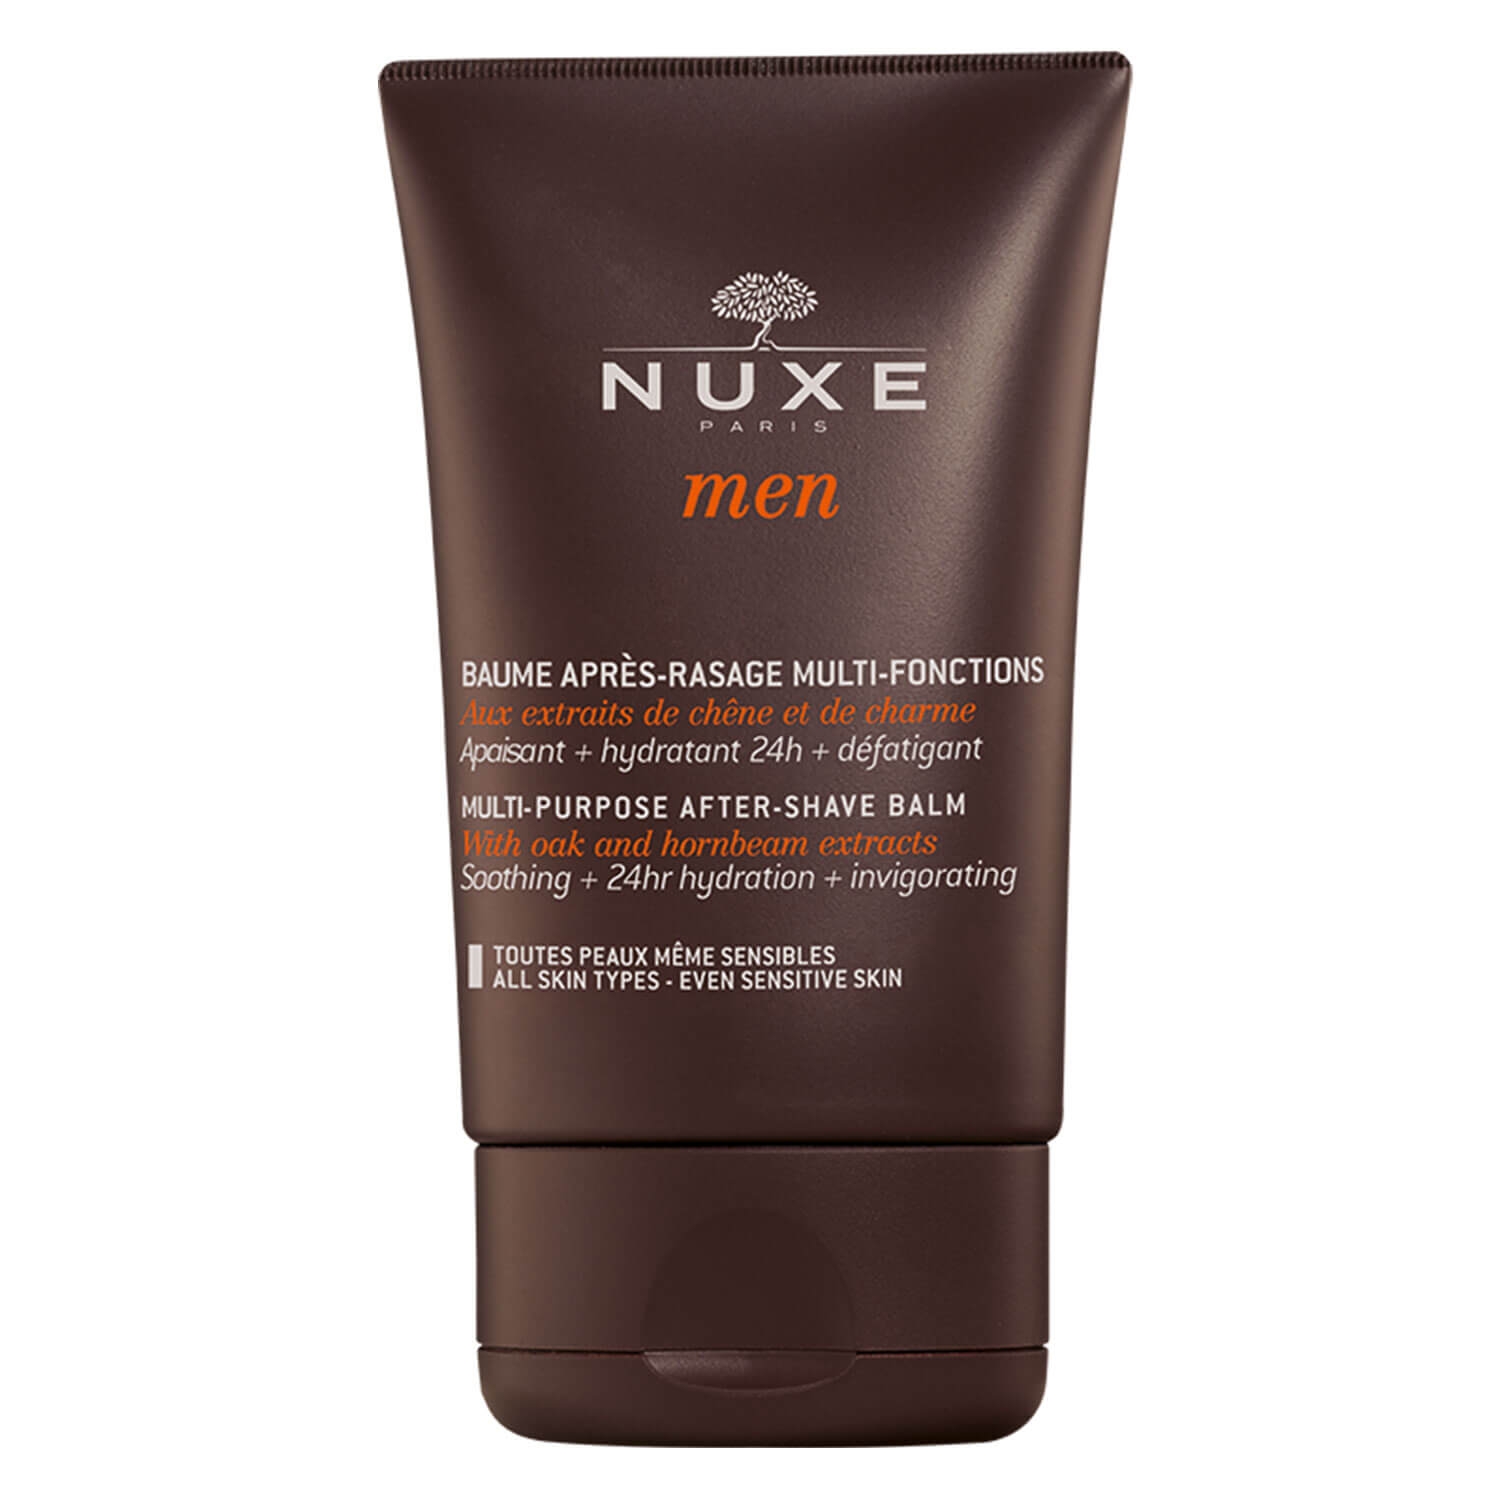 Product image from Nuxe Men - Baume après-rasage multi-fonctions